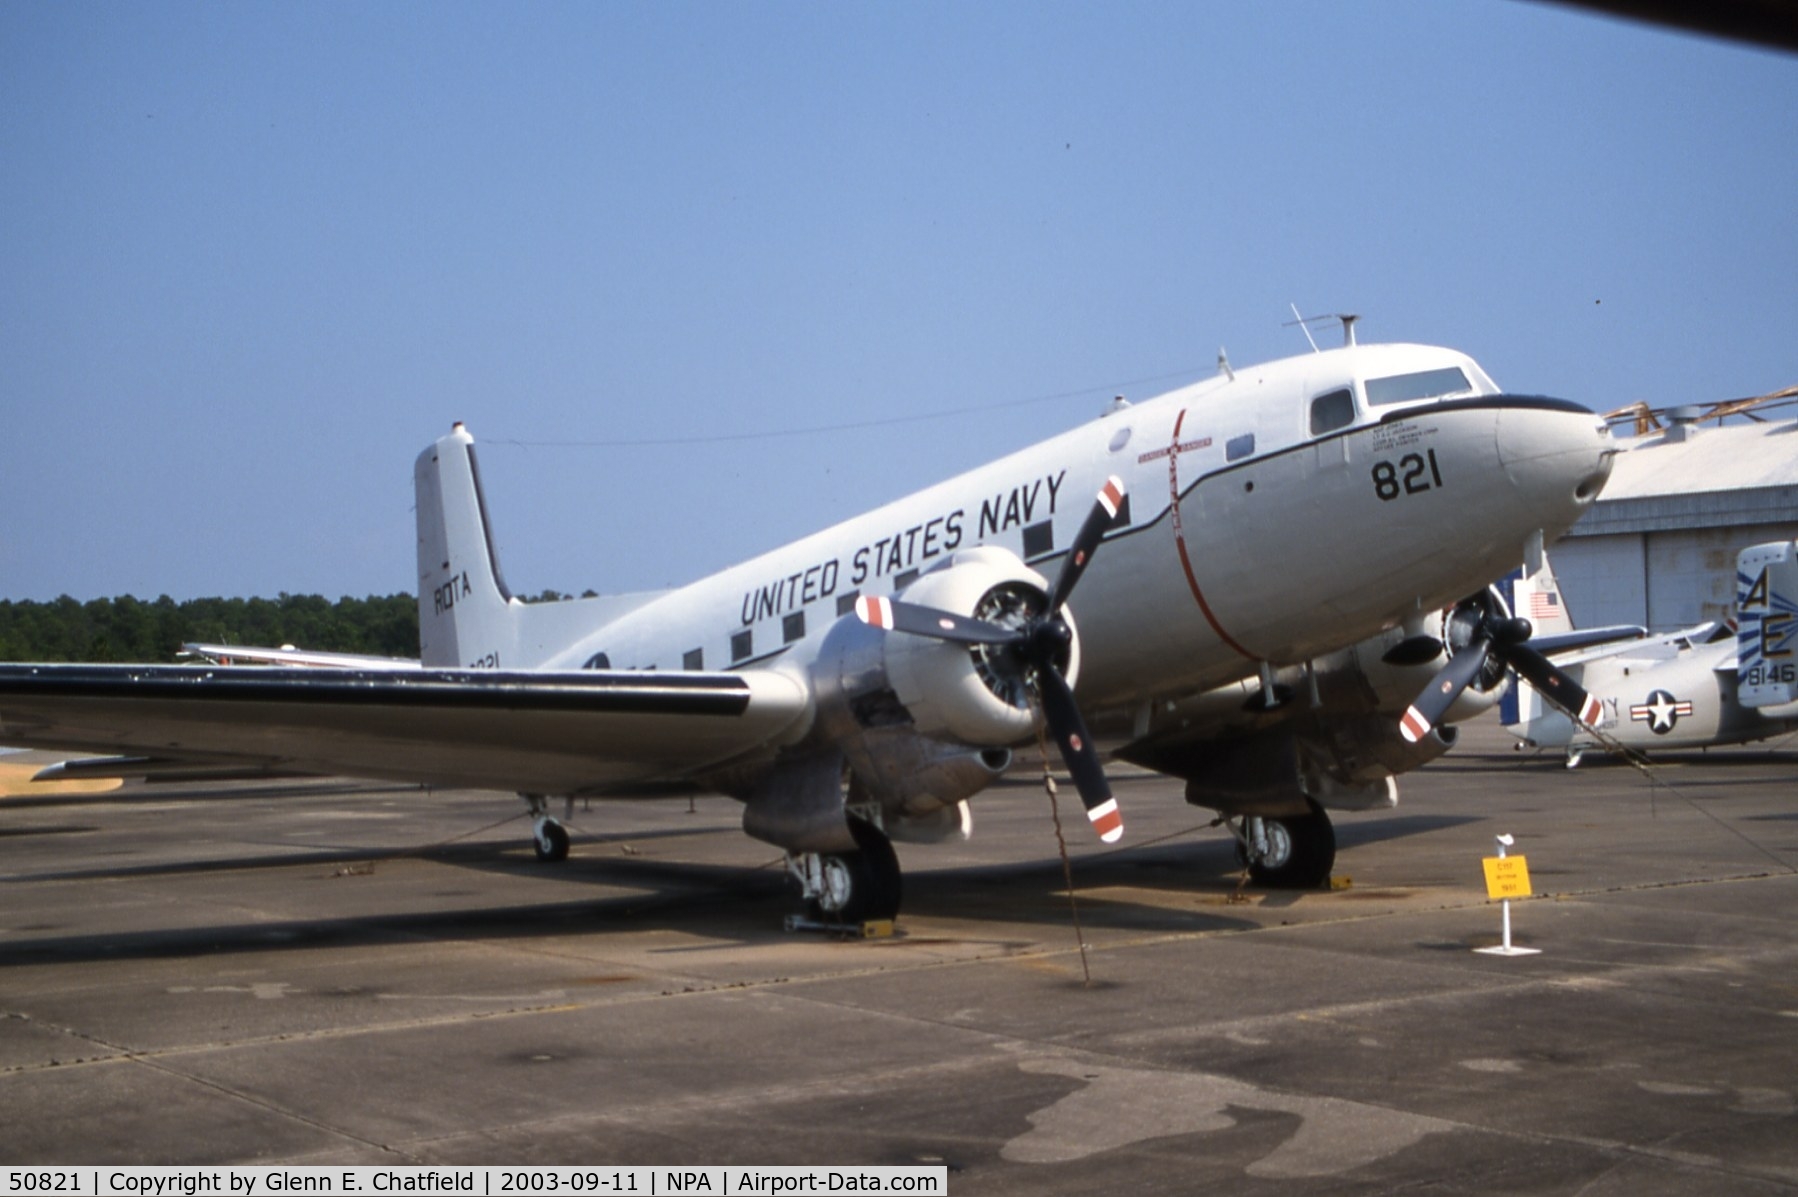 50821, 1944 Douglas C-117D C/N 43322, At the National Museum of Naval Aviation Bu. No. 50821